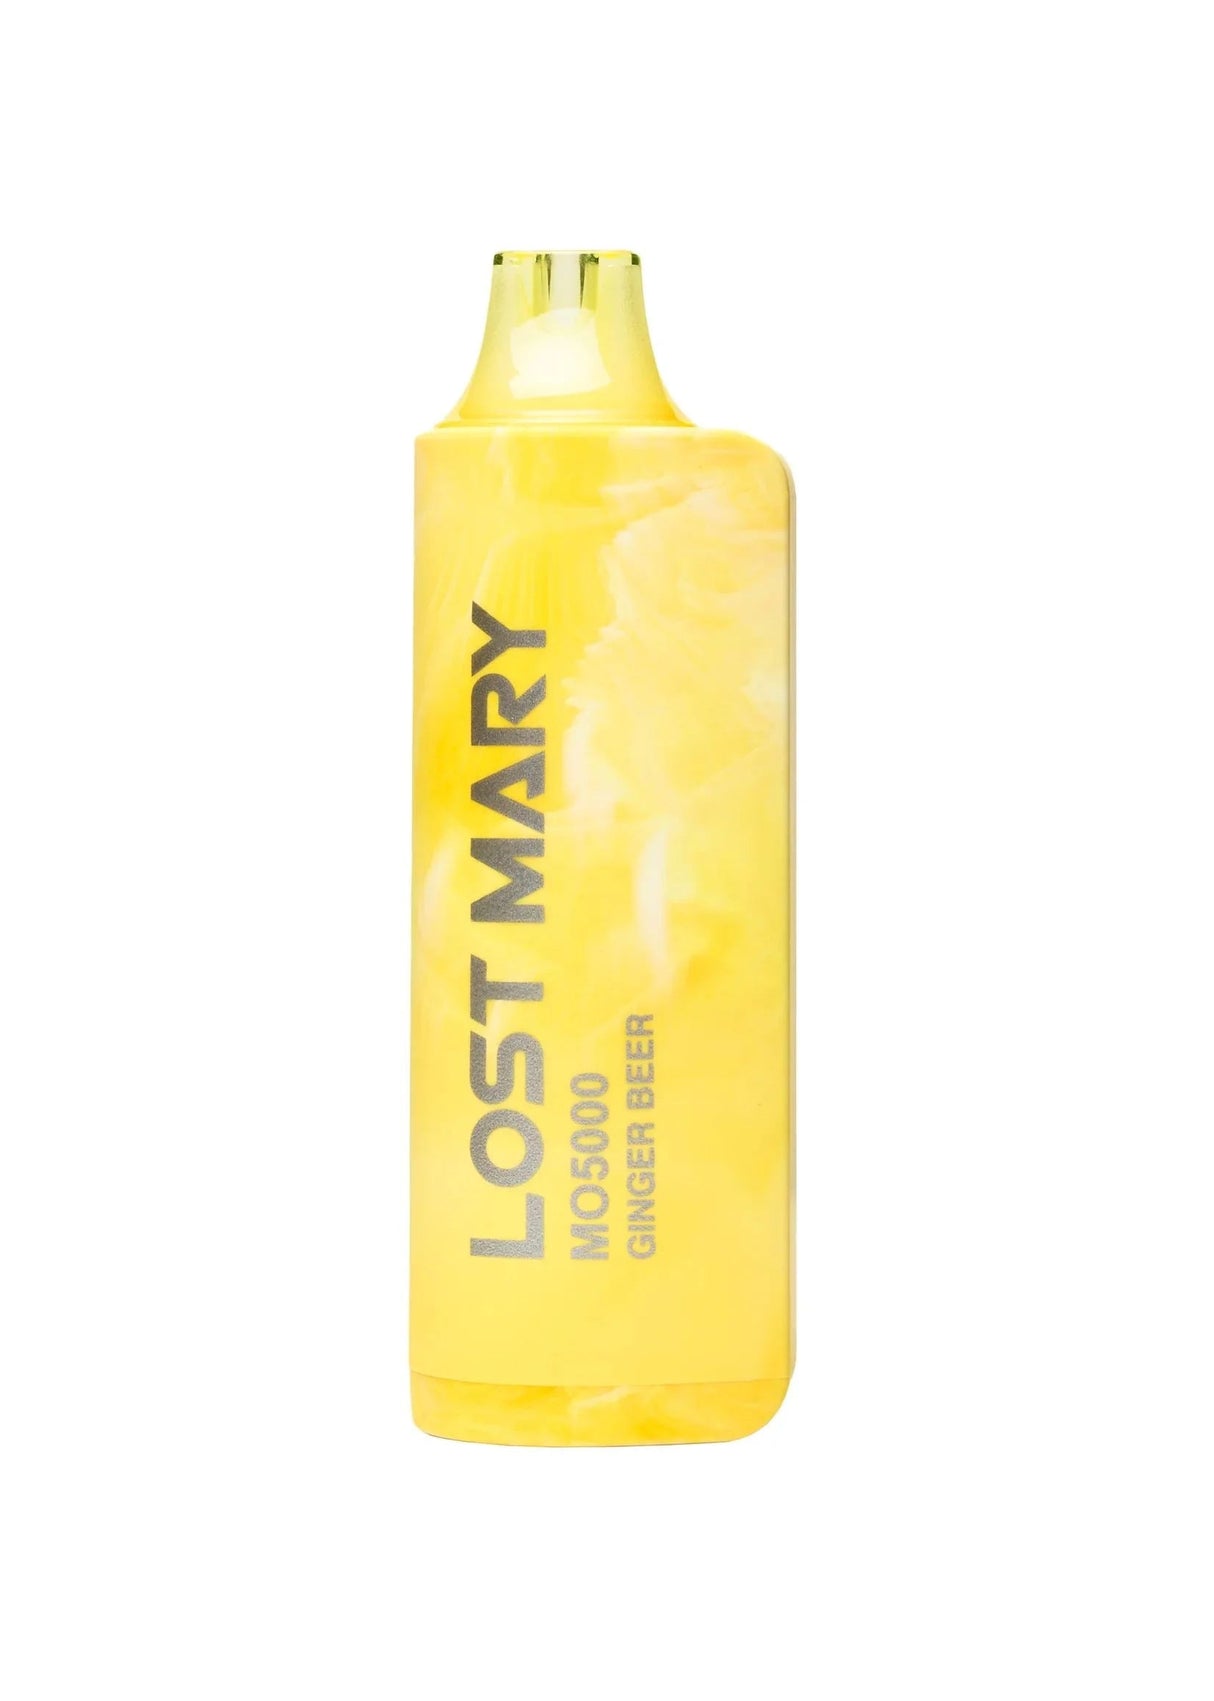 Lost Mary MO5000 Ginger Beer Flavor - Disposable Vape